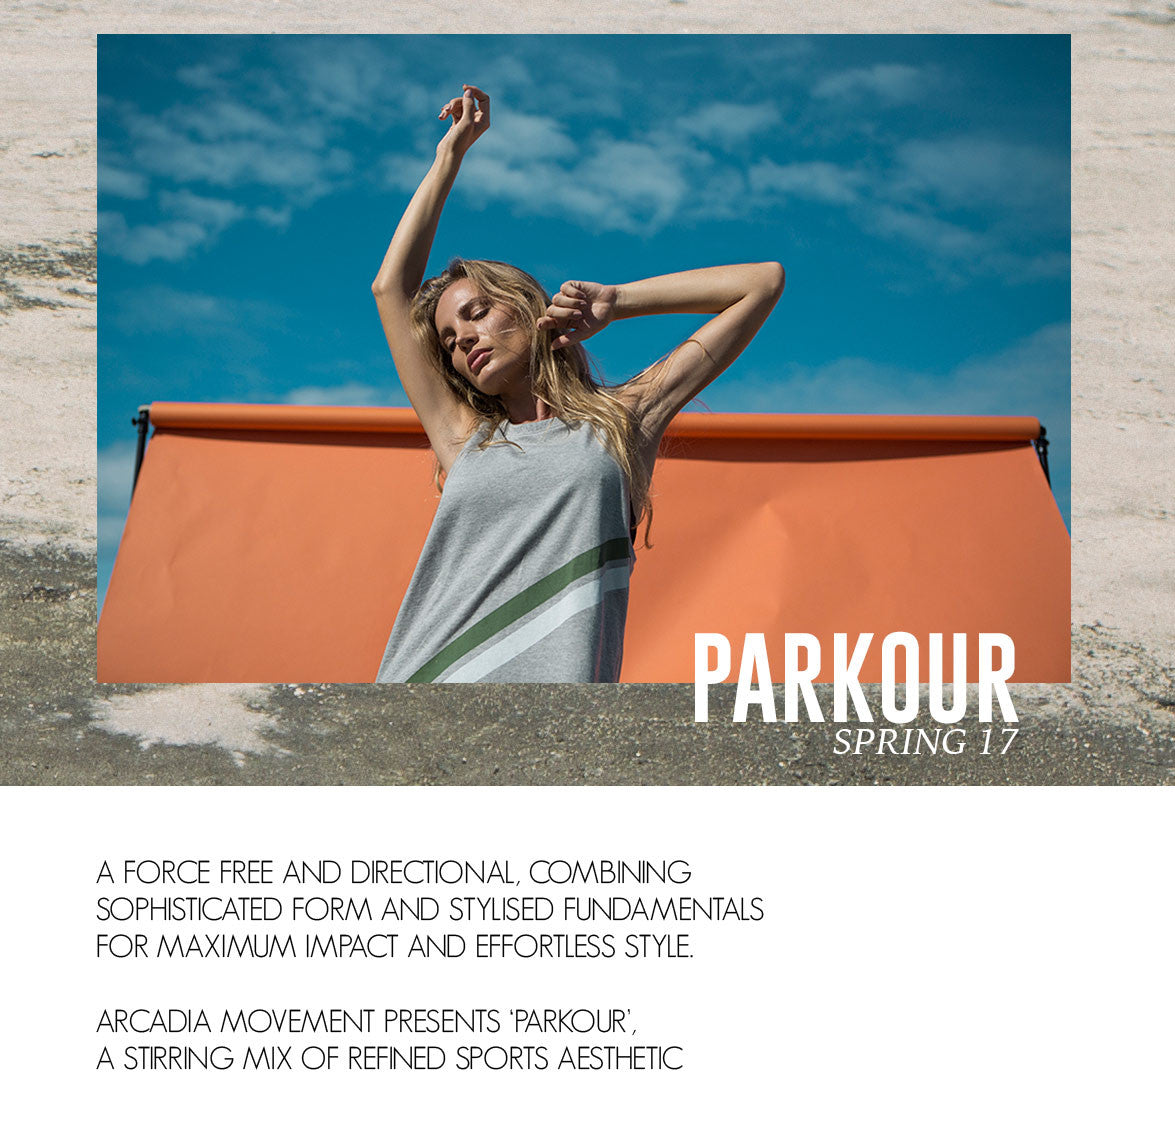 PARKOUR Spring 17 by Arcadia